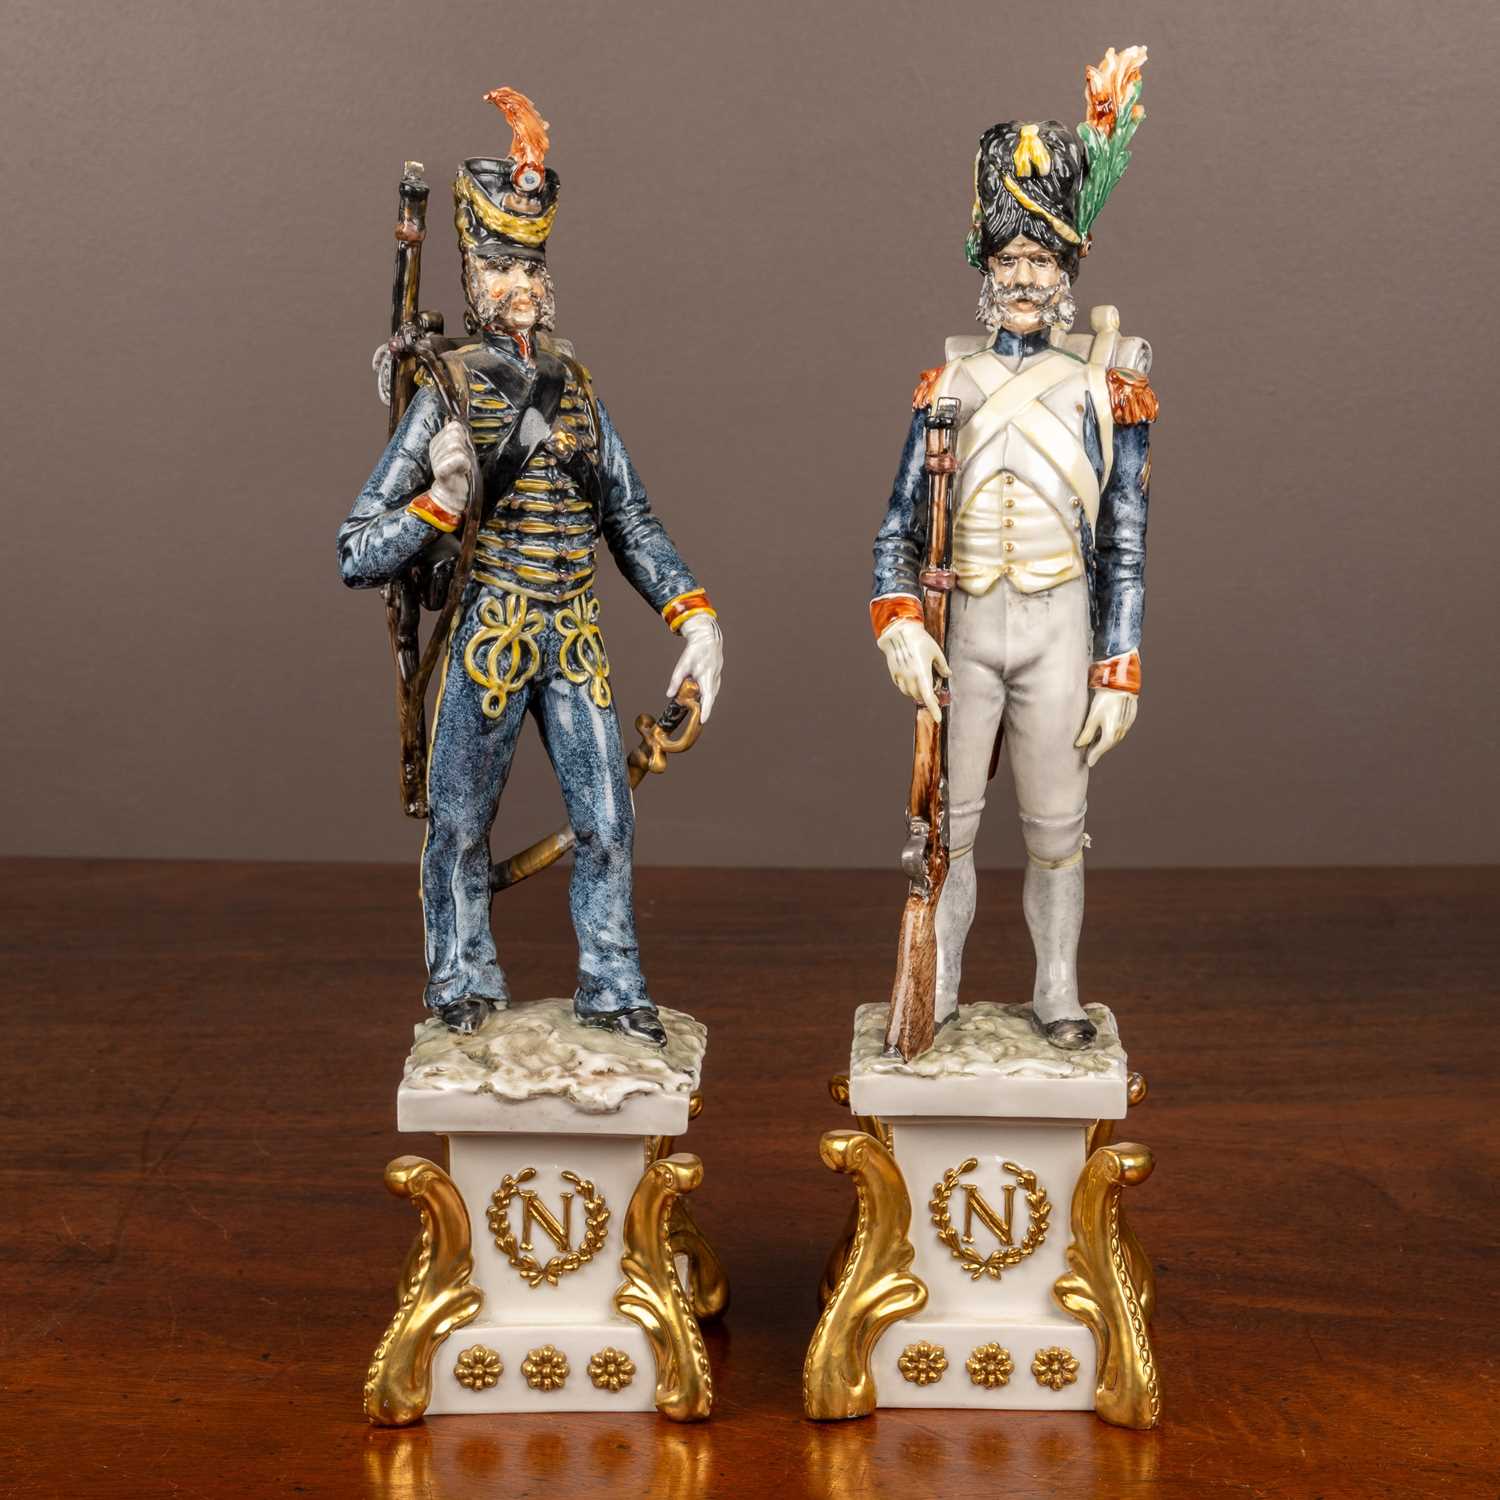 Lot 69 - A pair of porcelain models of Napoleonic soldiers by Guido Cacciapusti